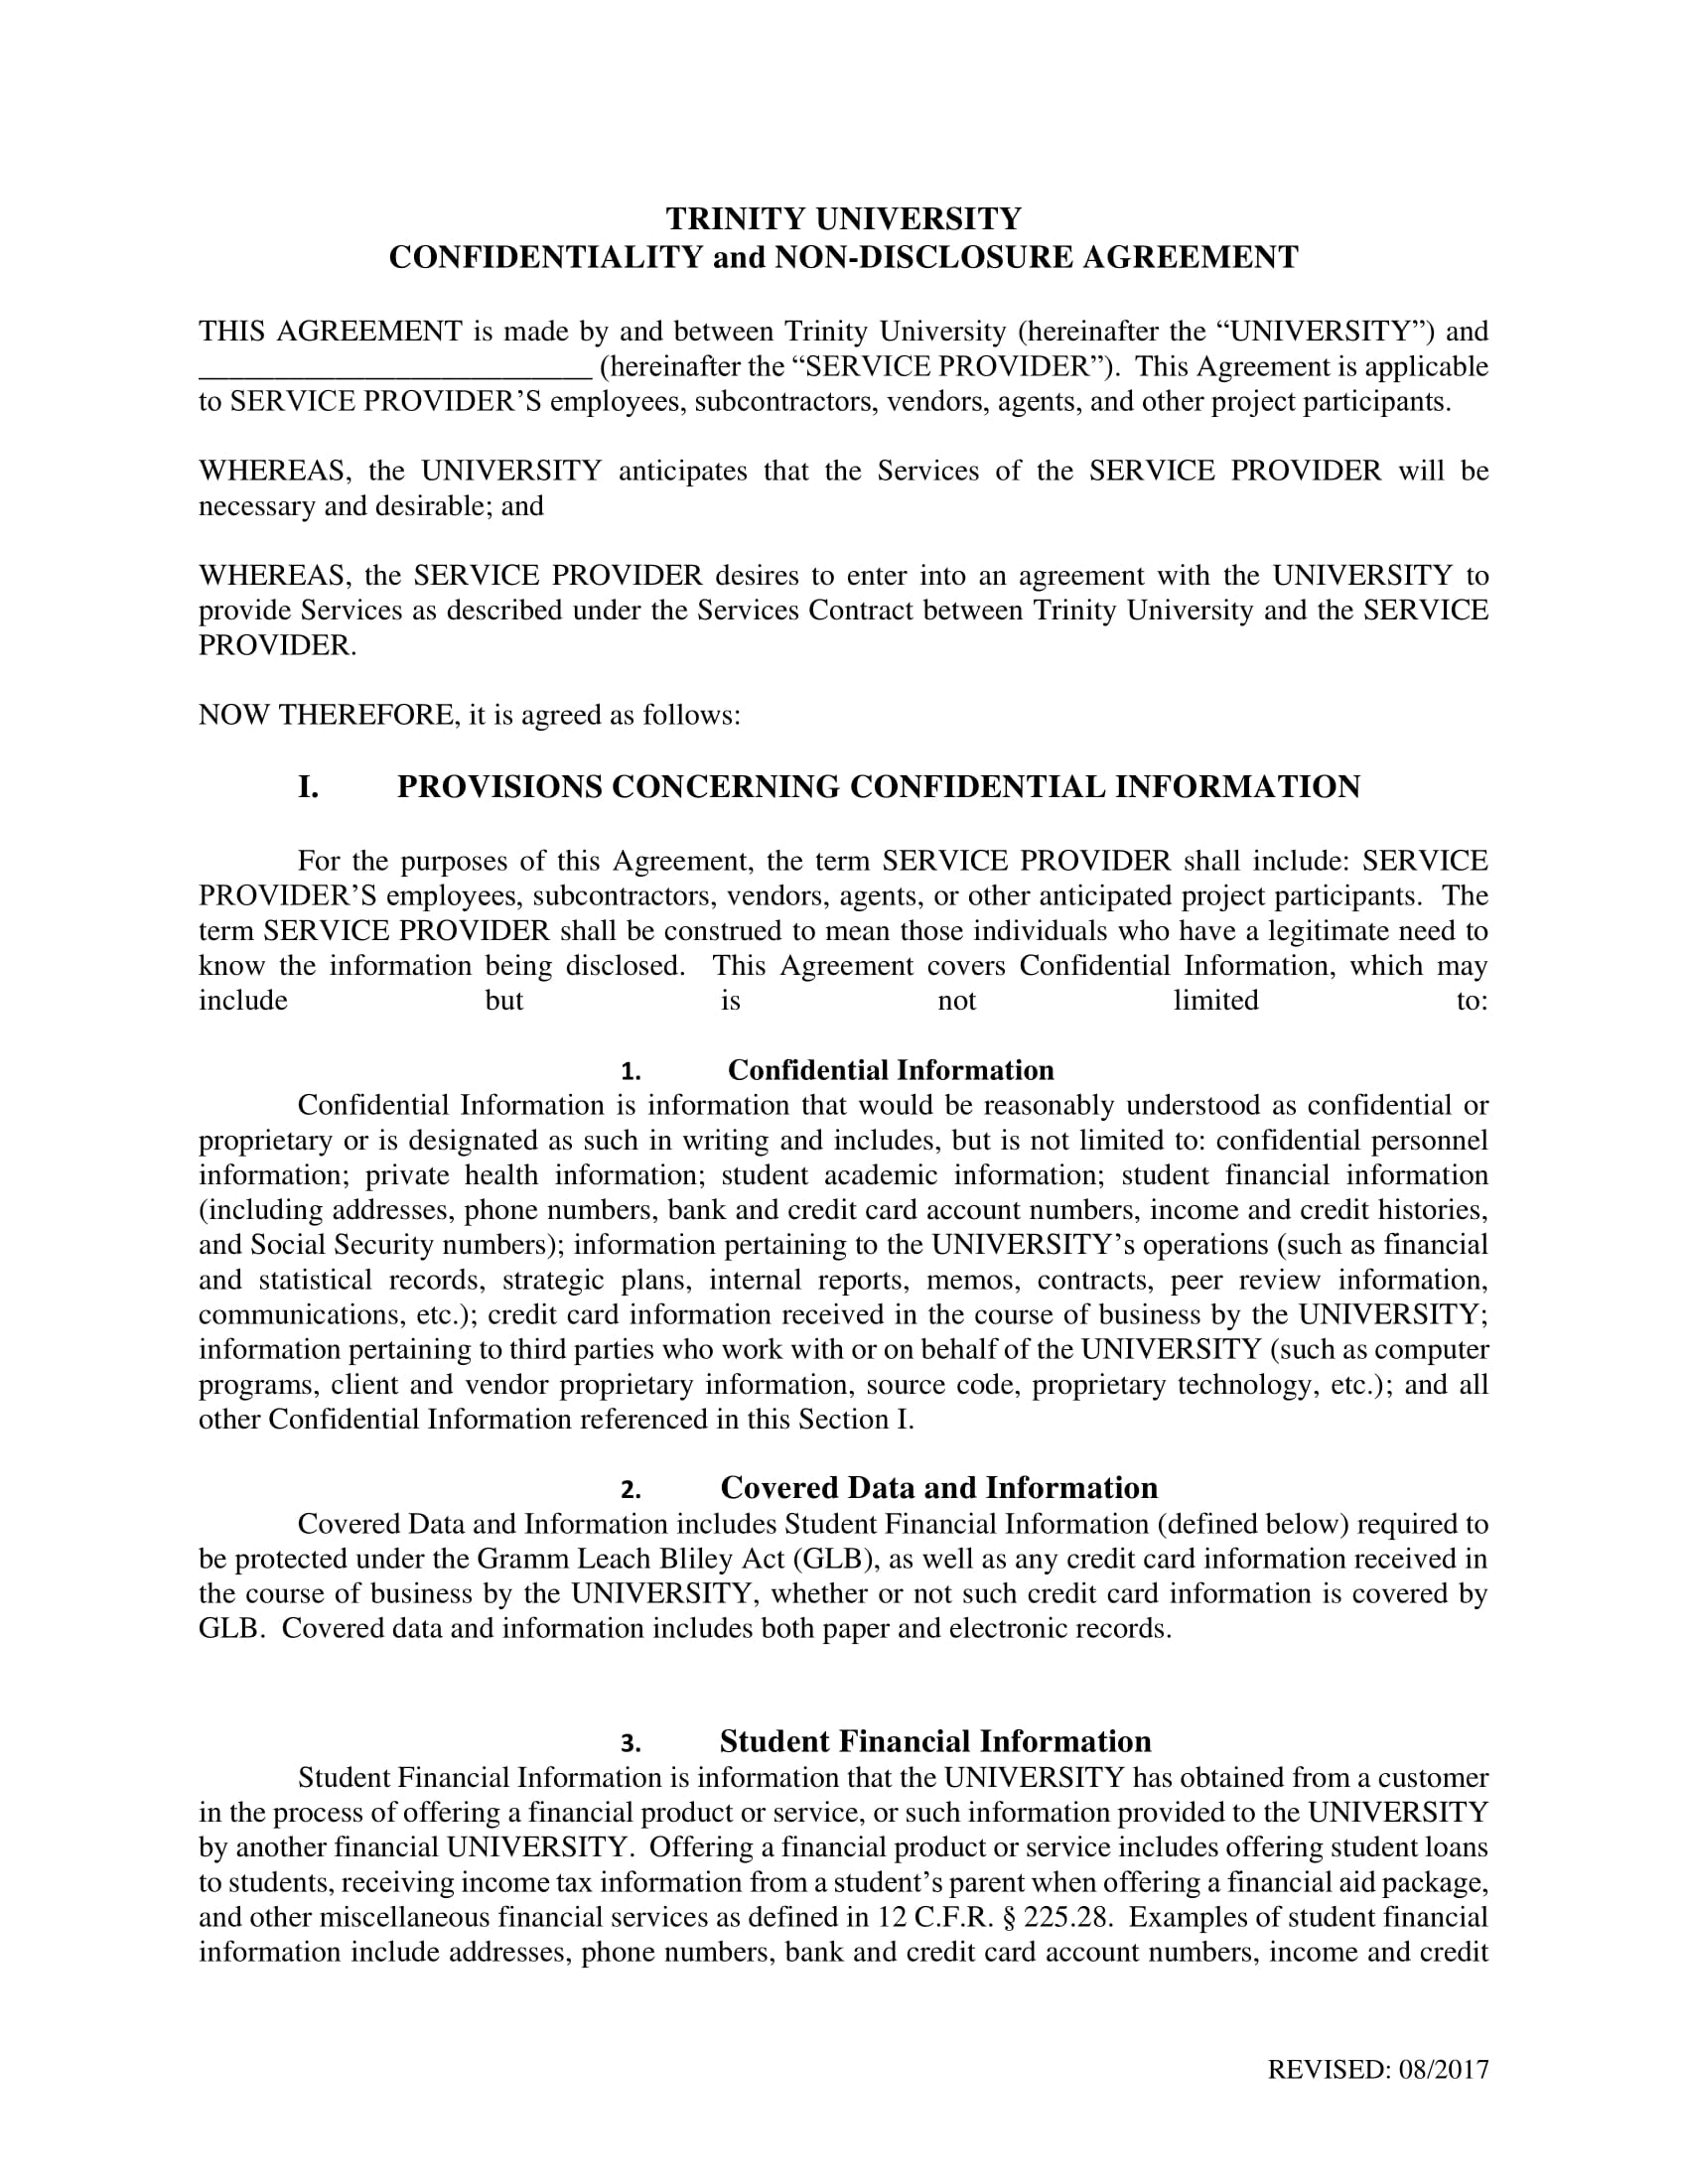 trinity university financial confidentiality agreement example